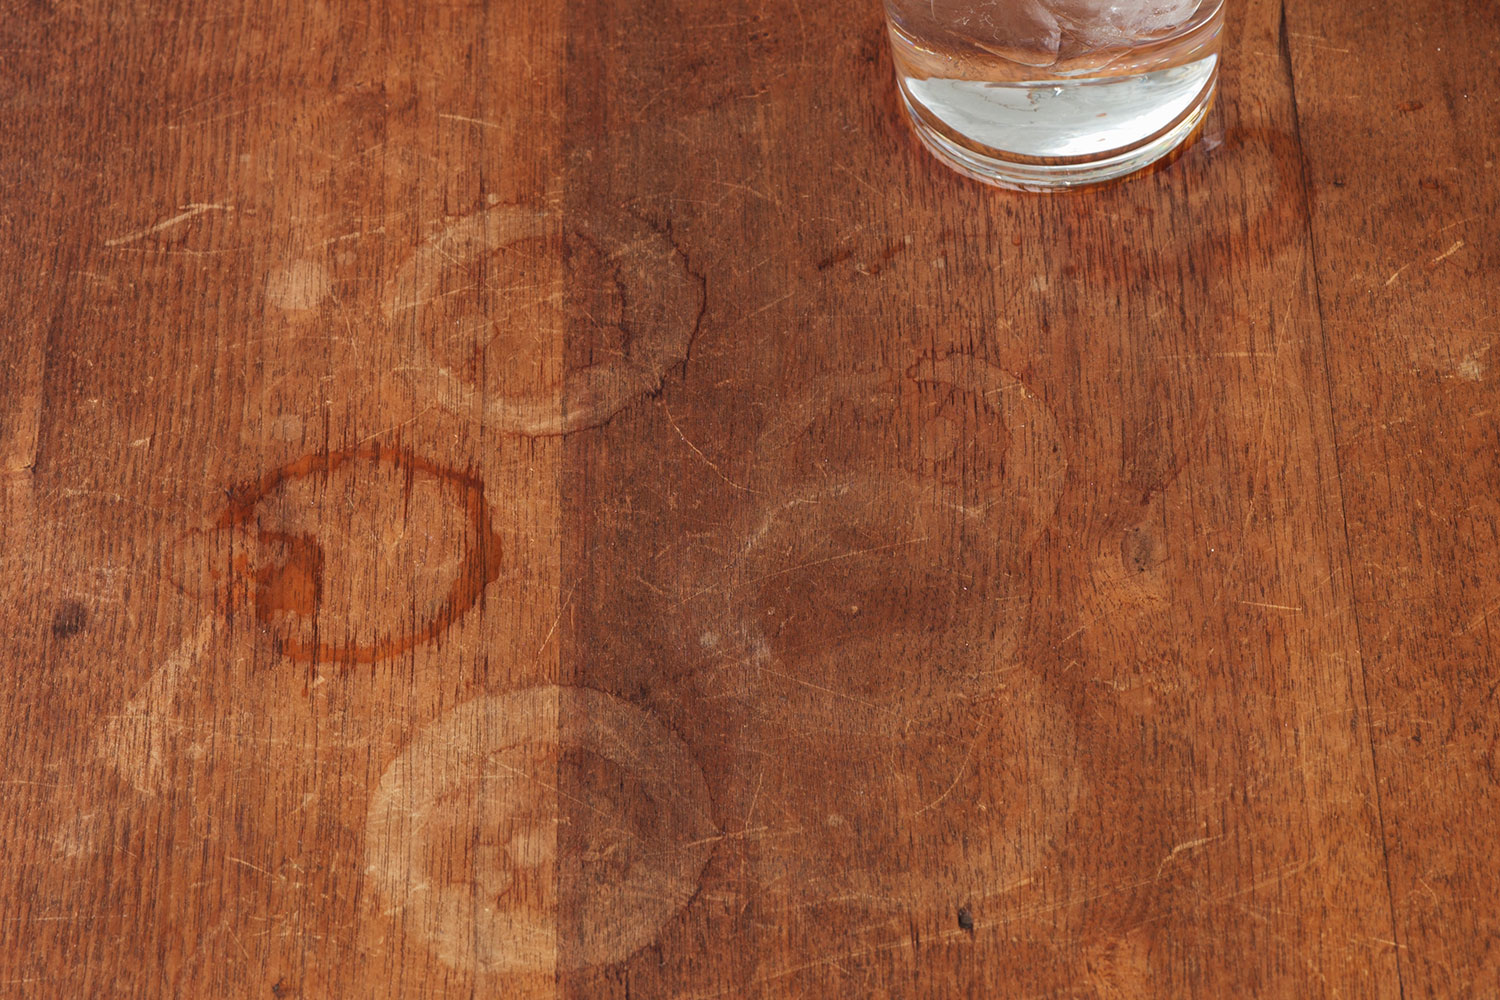 How To Remove Water Stains From Wood, How To Remove Water Stains From Laminate Wood Furniture